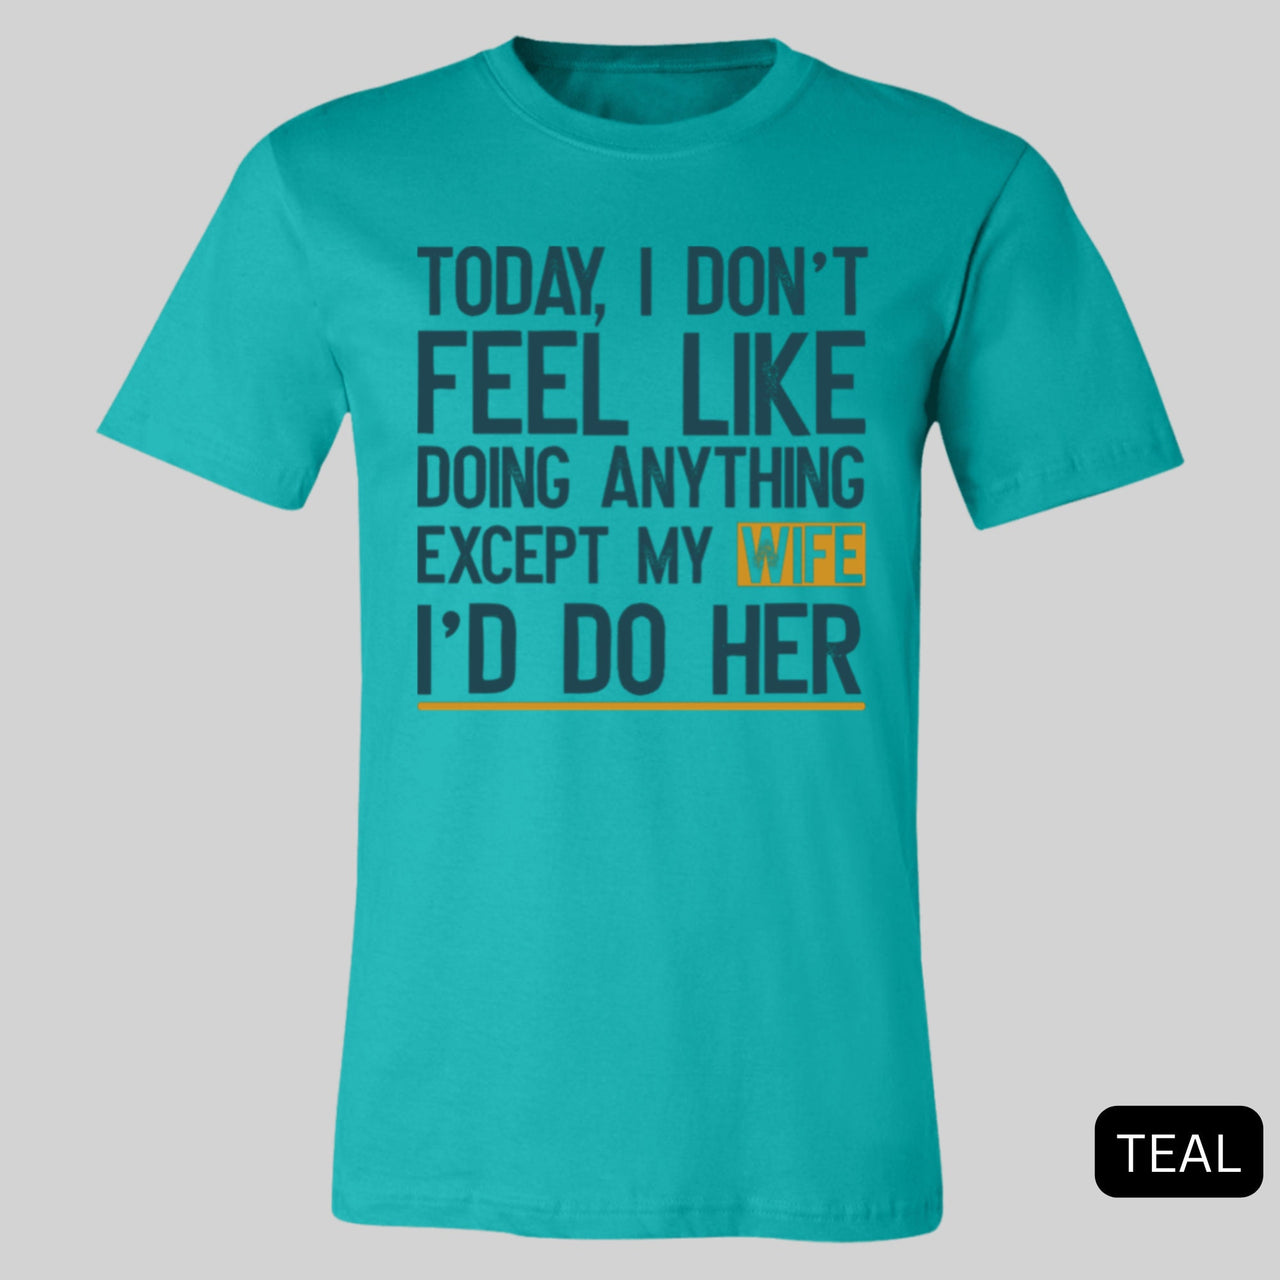 Today I Don't Feel Like Doing Anything Except My Wife I'll Do Her T-Shirt